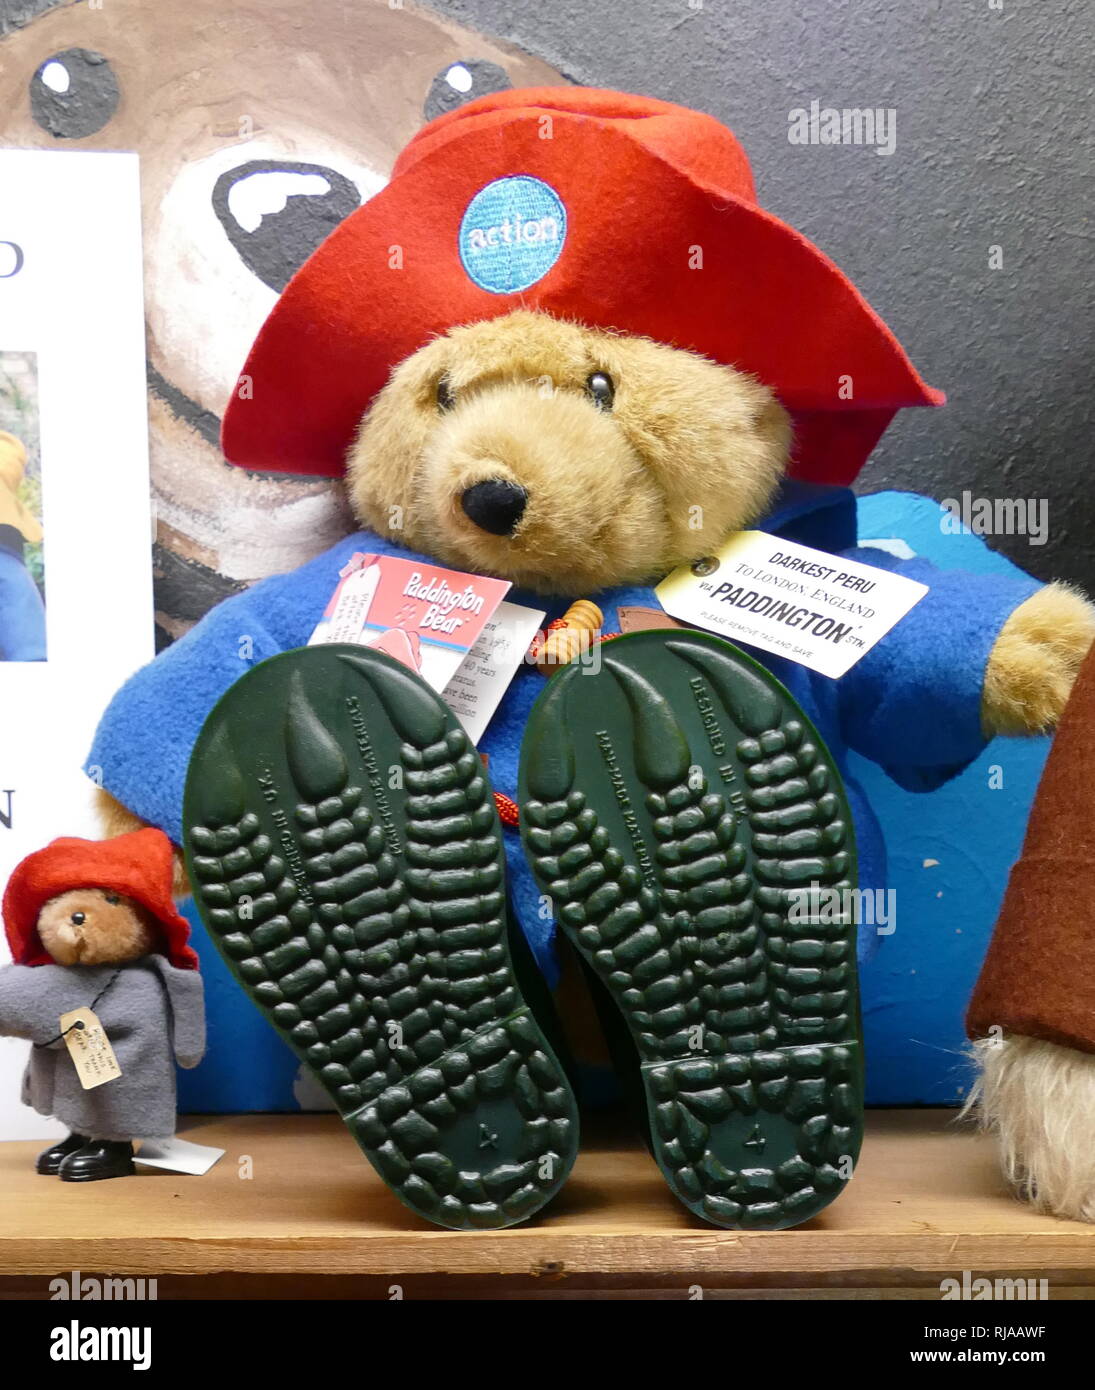 Paddington Bear is a fictional character in children's literature. He first appeared on 13 October 1958 in the children's book A Bear Called Paddington and has been featured in more than twenty books written by British author Michael Bond and illustrated by Peggy Fortnum and other artists Stock Photo